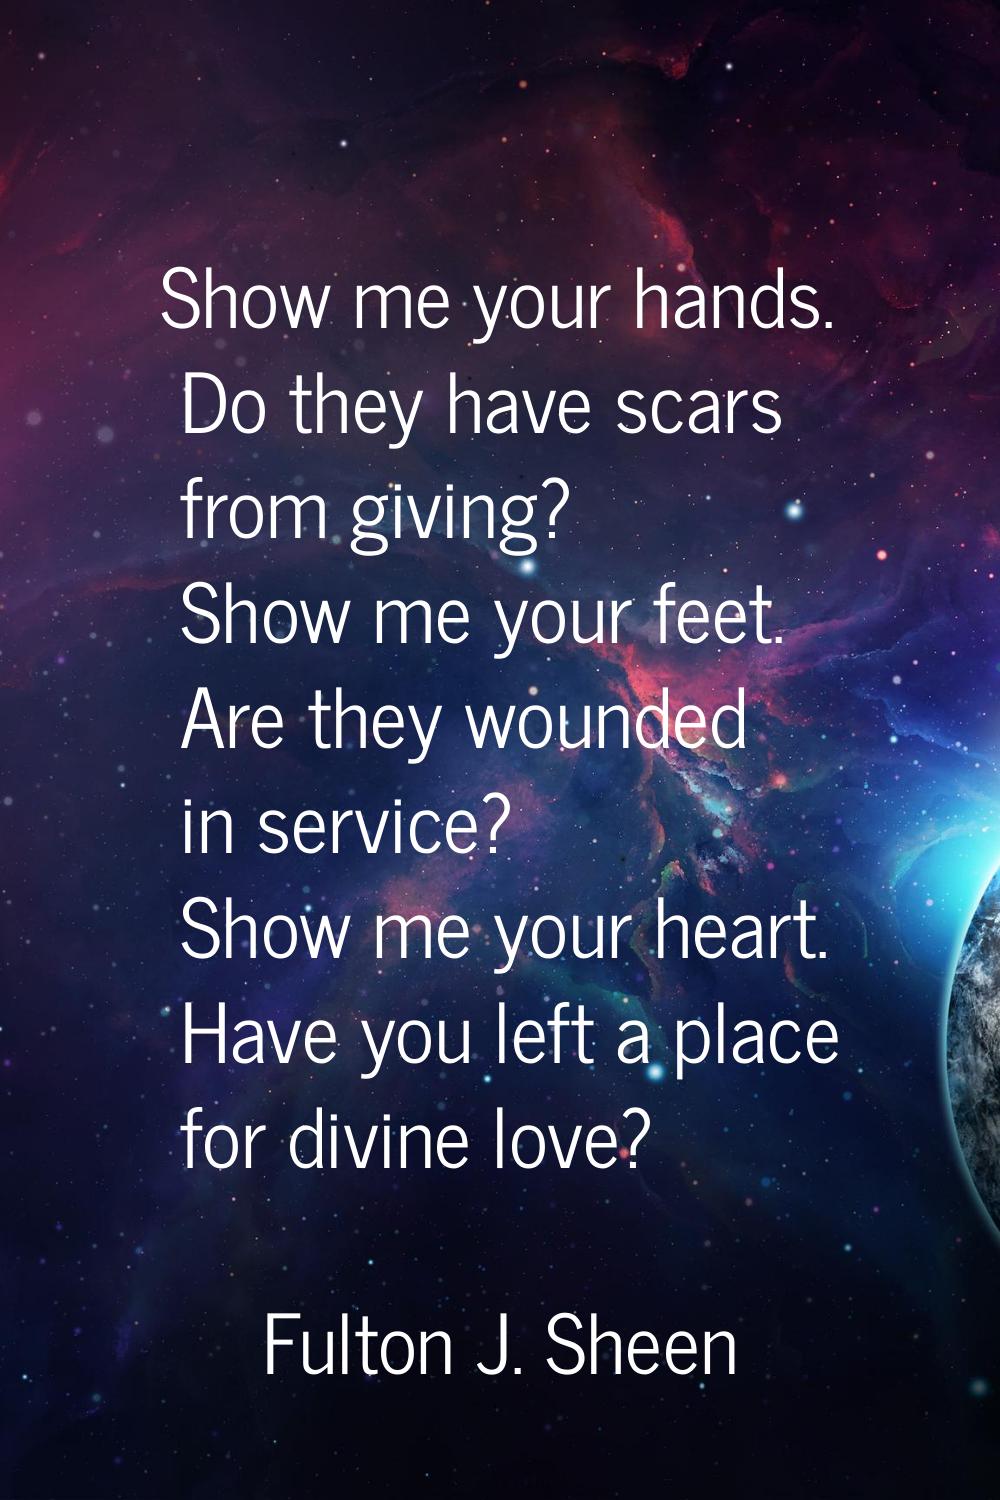 Show me your hands. Do they have scars from giving? Show me your feet. Are they wounded in service?